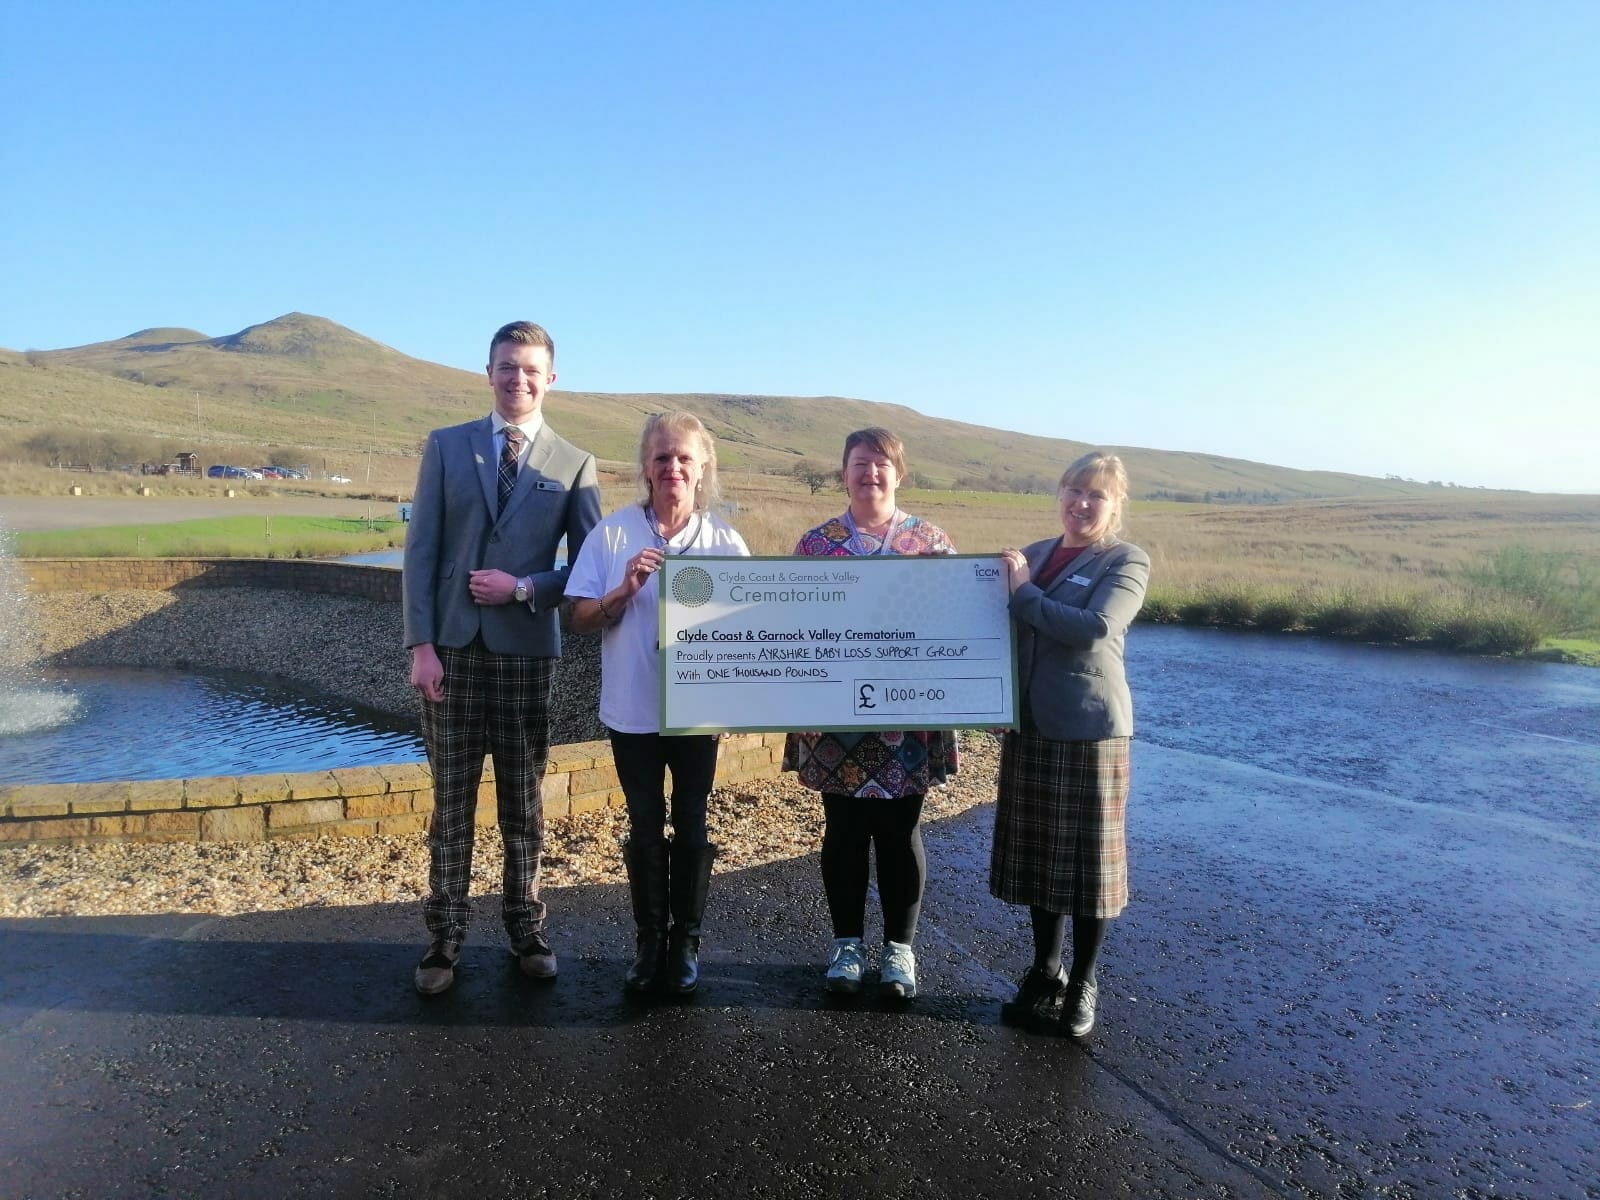 CLYDE COAST & GARNOCK VALLEY CREMATORIUM CONTINUES SUPPORT OF LOCAL CHARITIES WITH MUCH NEEDED DONATIONS